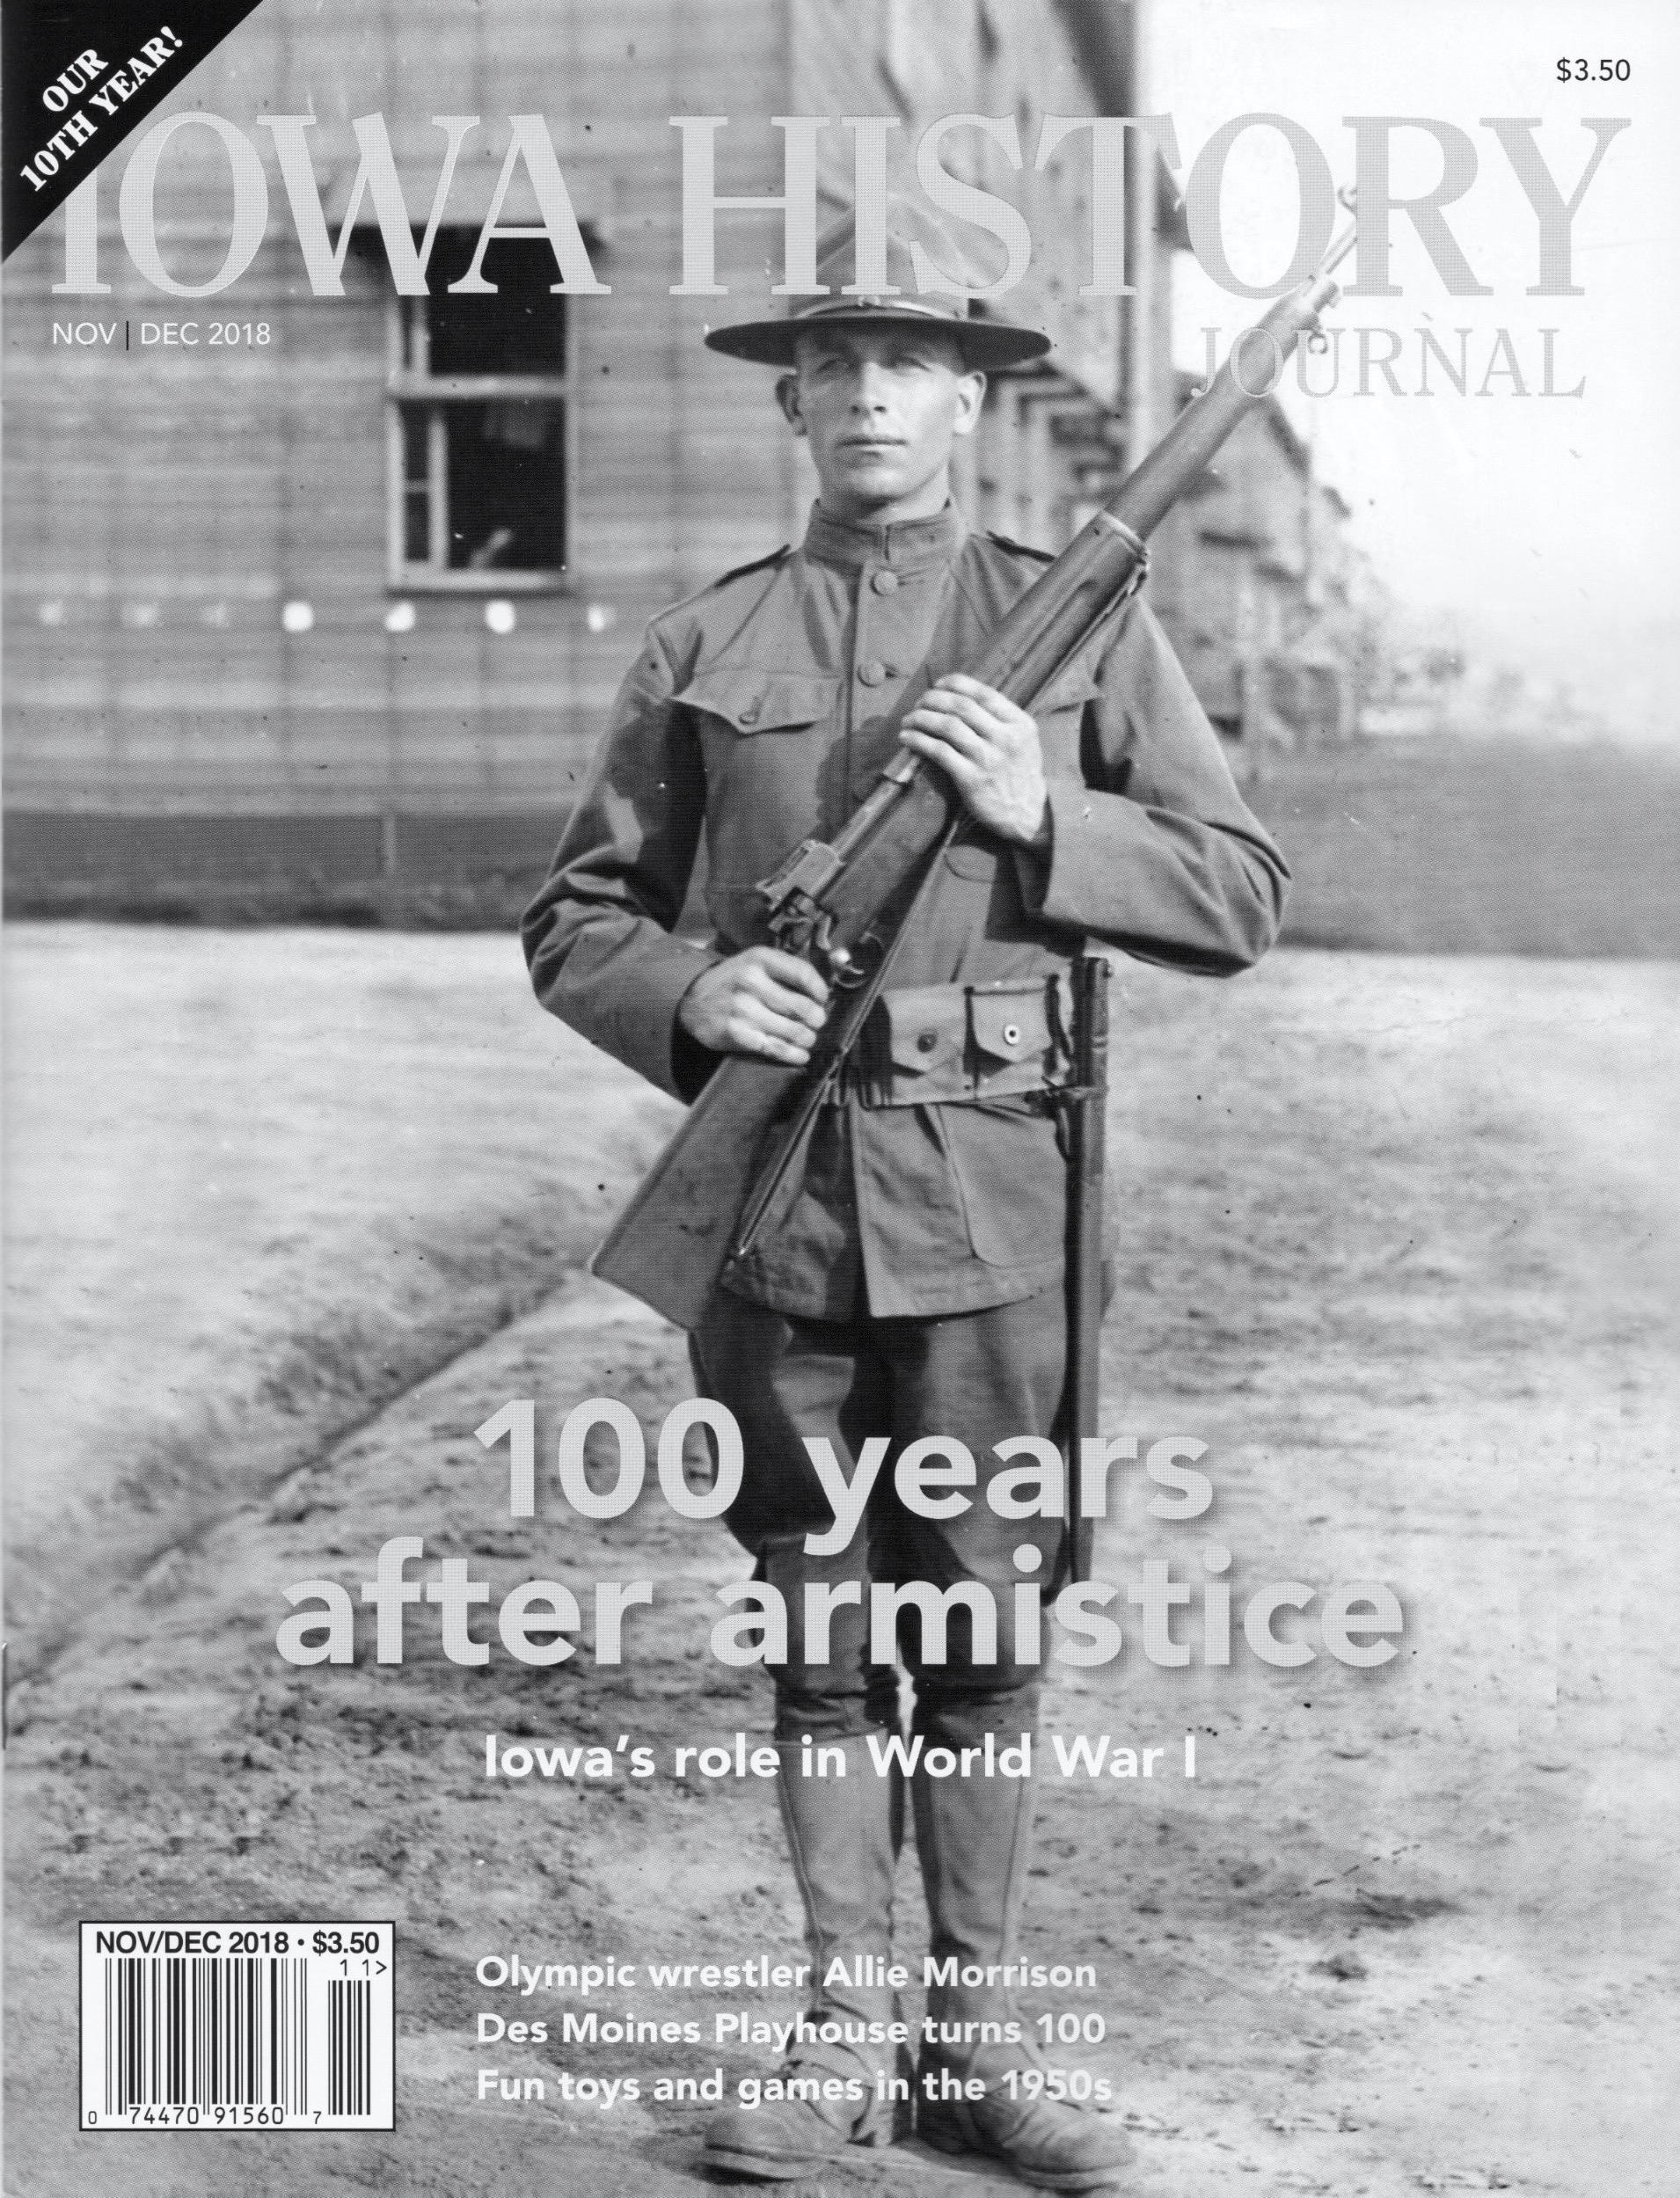 Volume 10, Issue 6 - 100 years after armistice